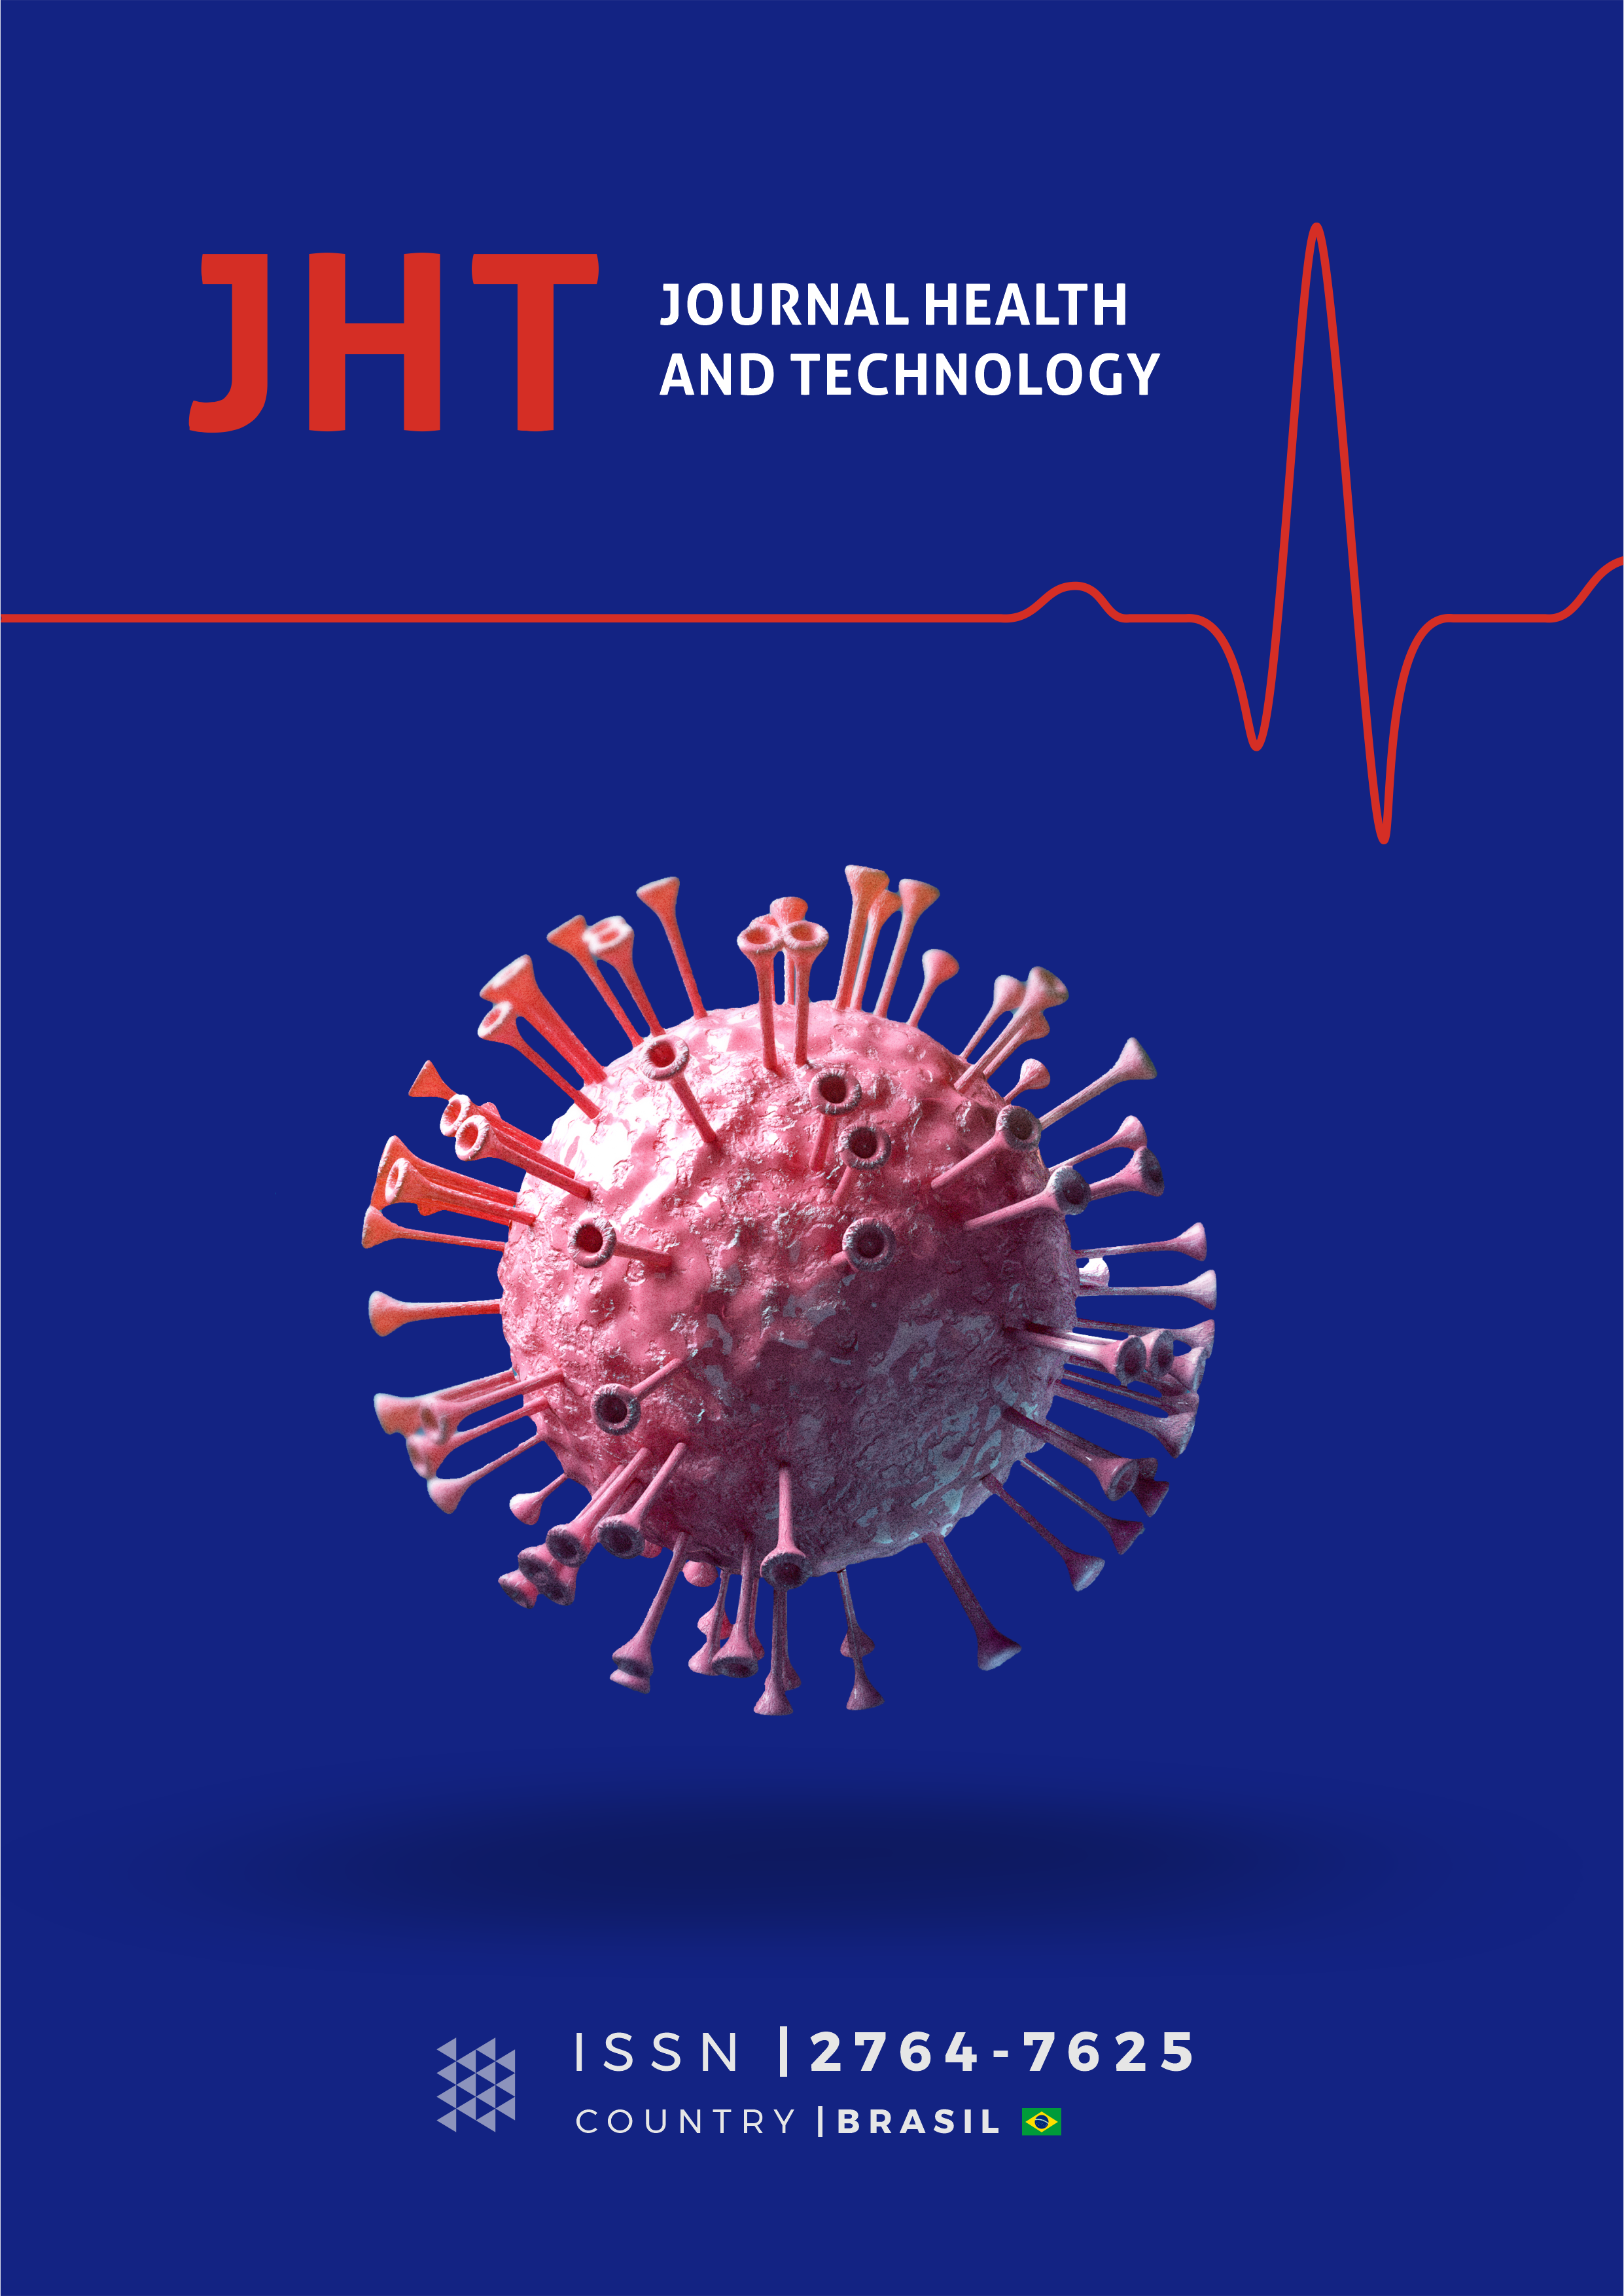 					View Vol. 1 No. 1 (2022): JOURNAL HEALTH AND TECHNOLOGY - JHT
				